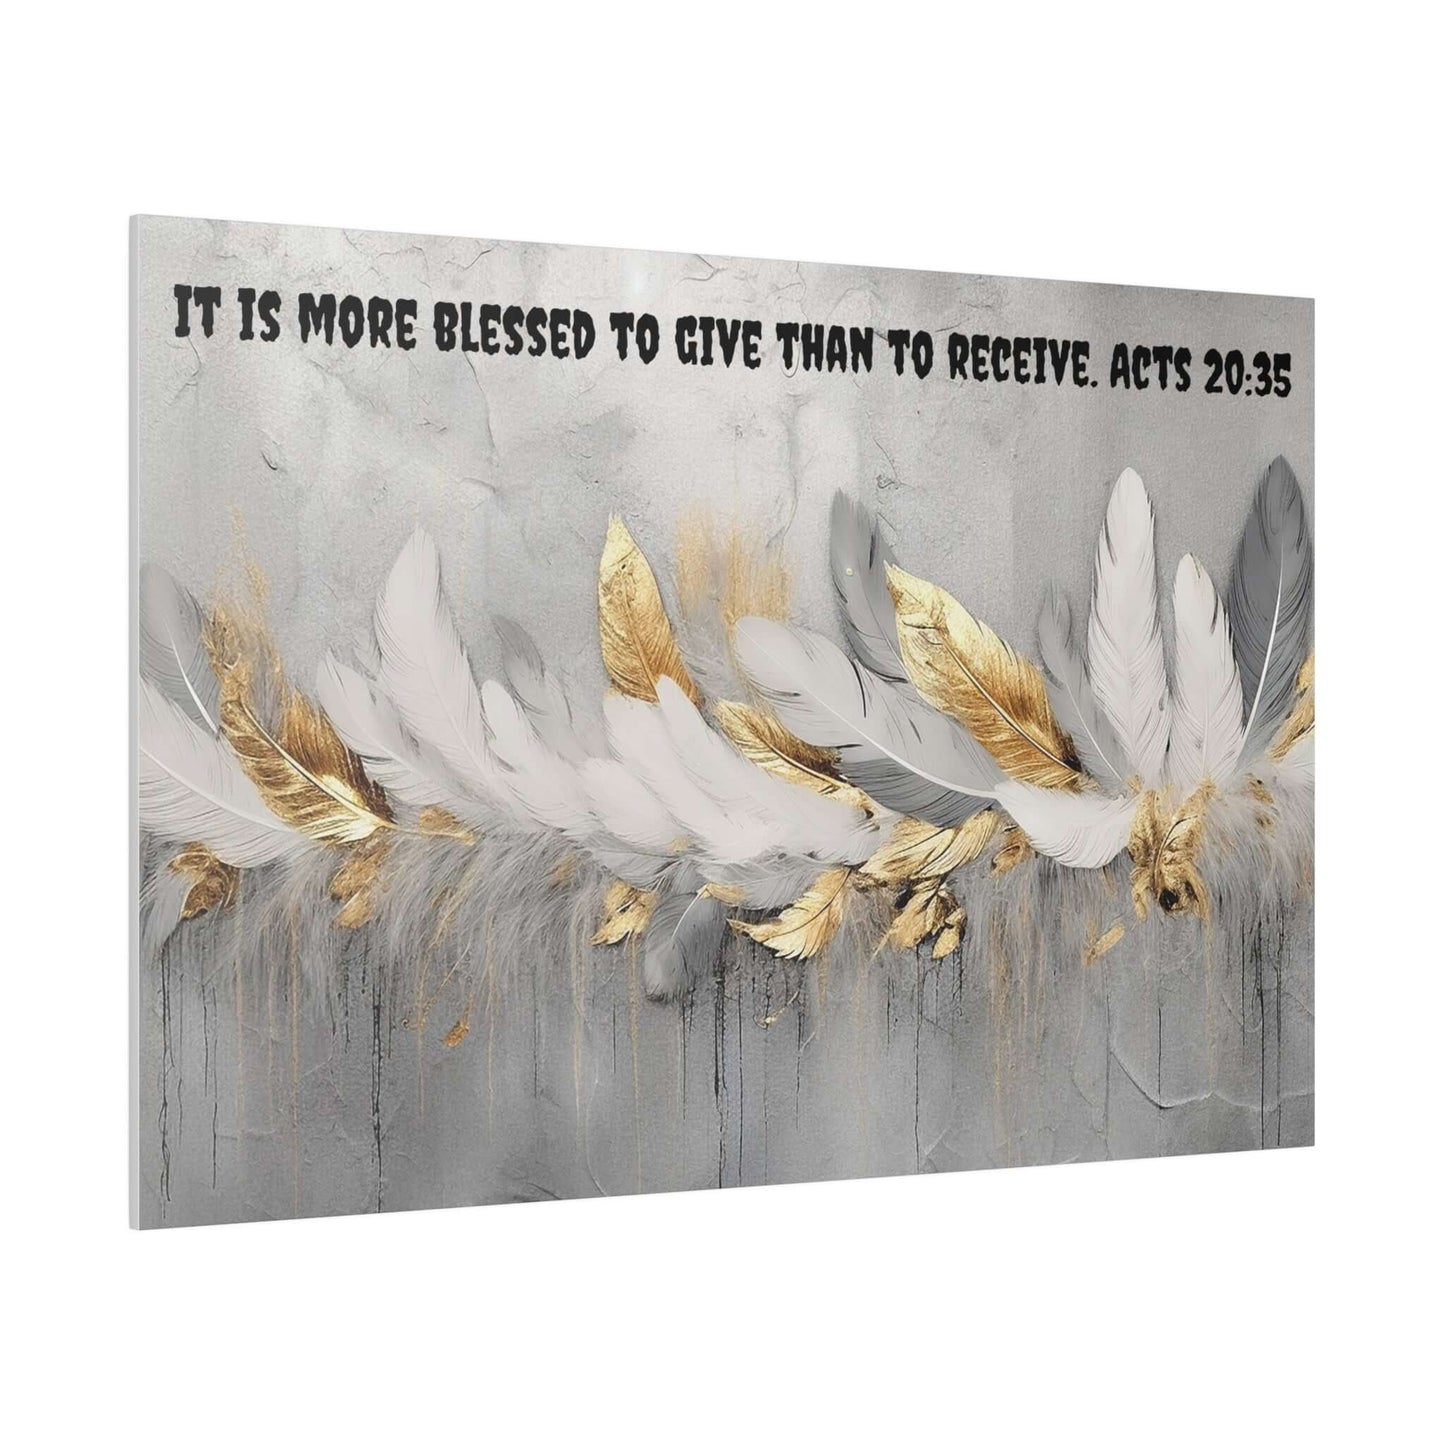 Canvas Decor with Acts 20:35 - Eco-Friendly and Vibrant Unframed Art | Art & Wall Decor,Canvas,Decor,Eco-friendly,Hanging Hardware,Holiday Picks,Home & Living,Indoor,Matte,Seasonal Picks,Sustainable,Wall,Wood